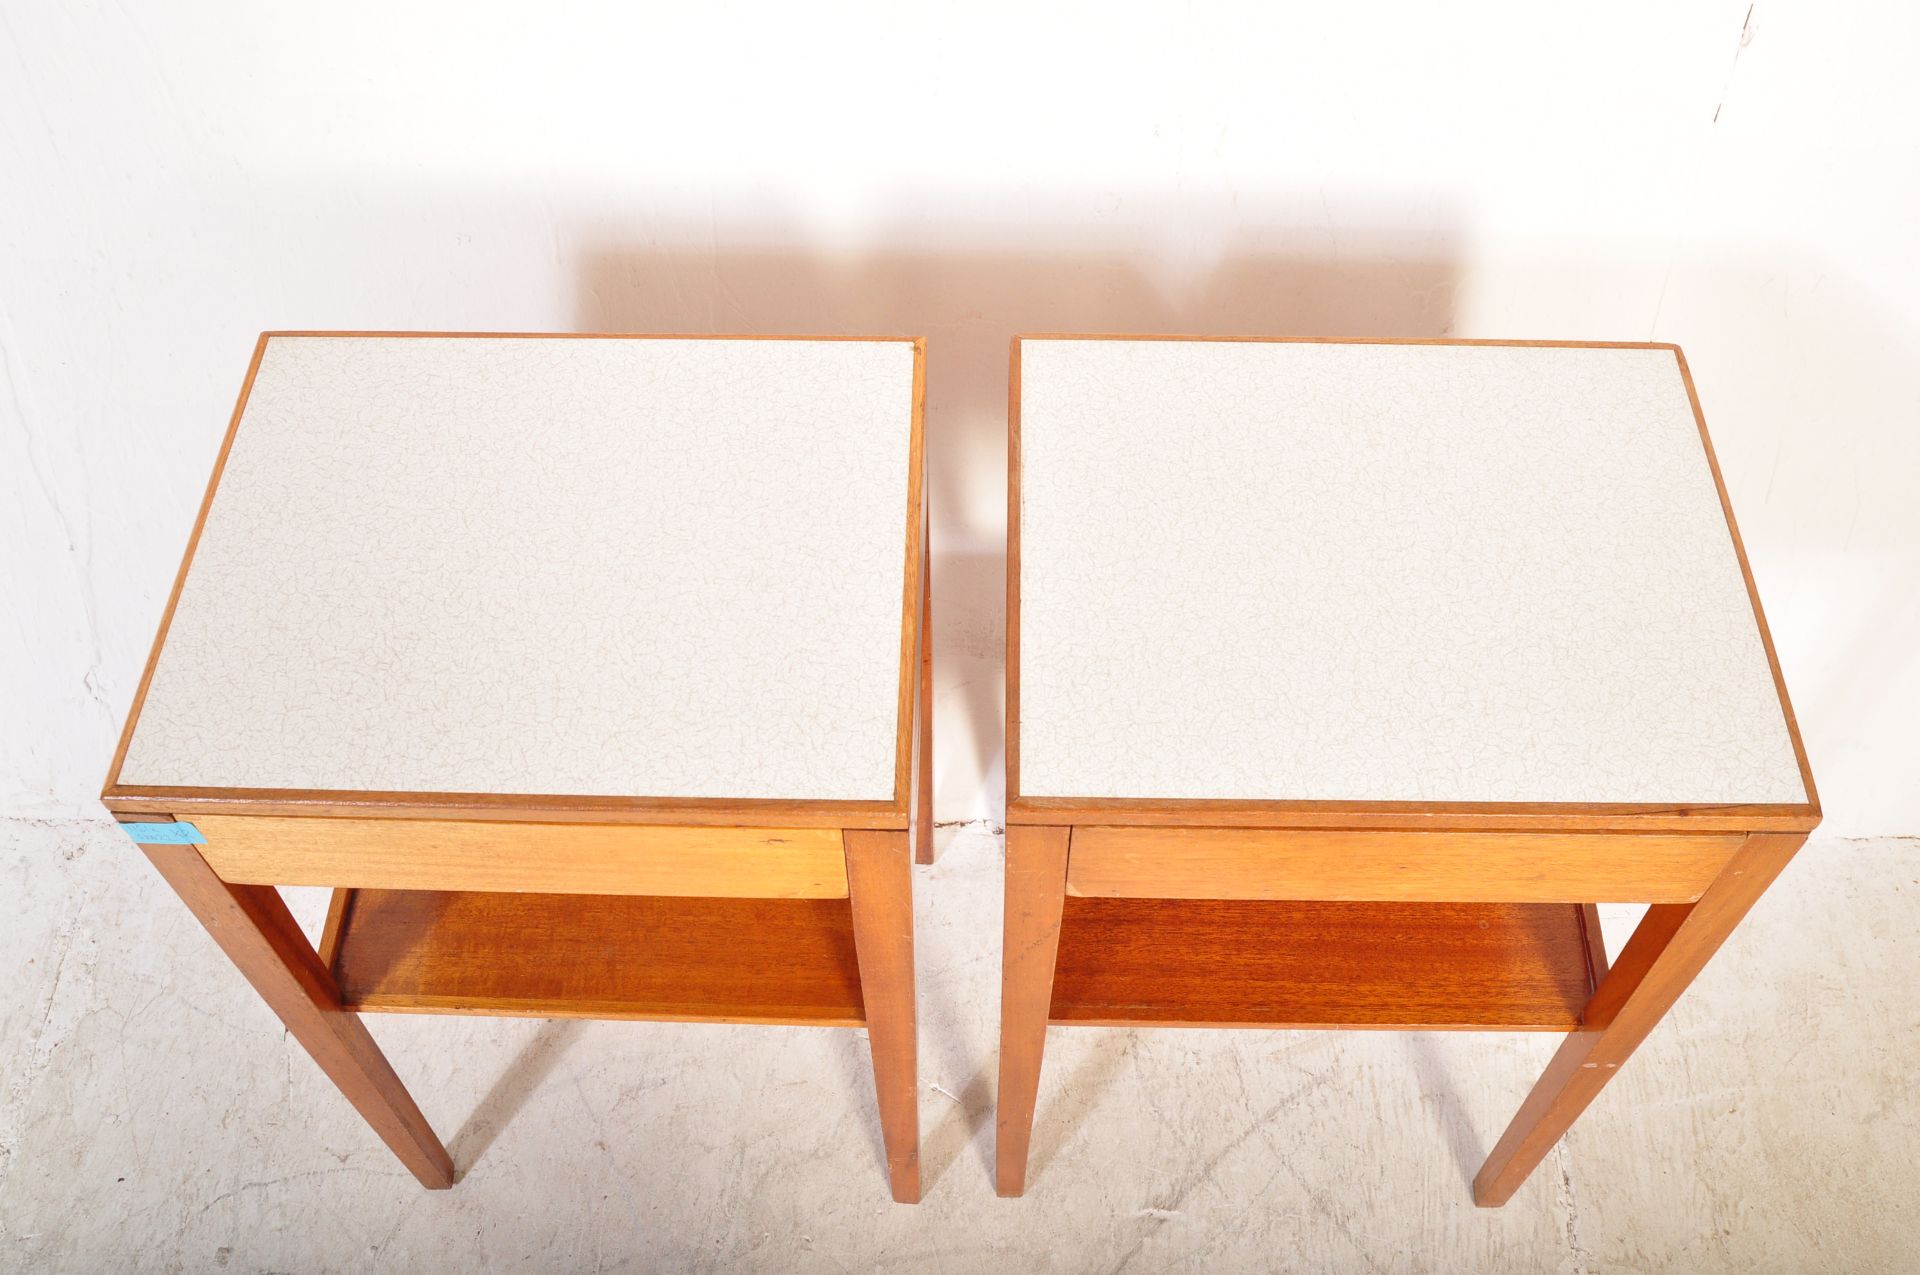 PAIR OF VINTAGE AIR MINISTRY BEDSIDE TABLES - Image 2 of 5